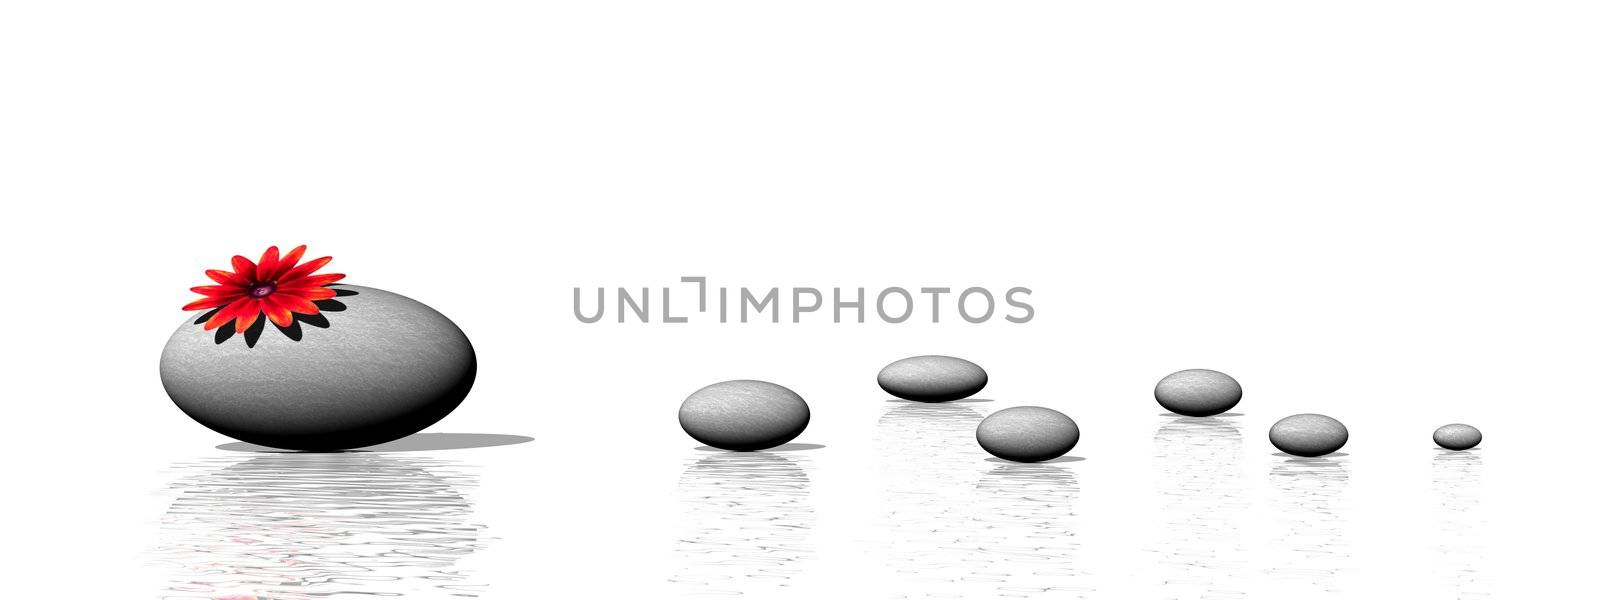 A big grey stones with a beautiful red flower on it and small pebbles in a white background